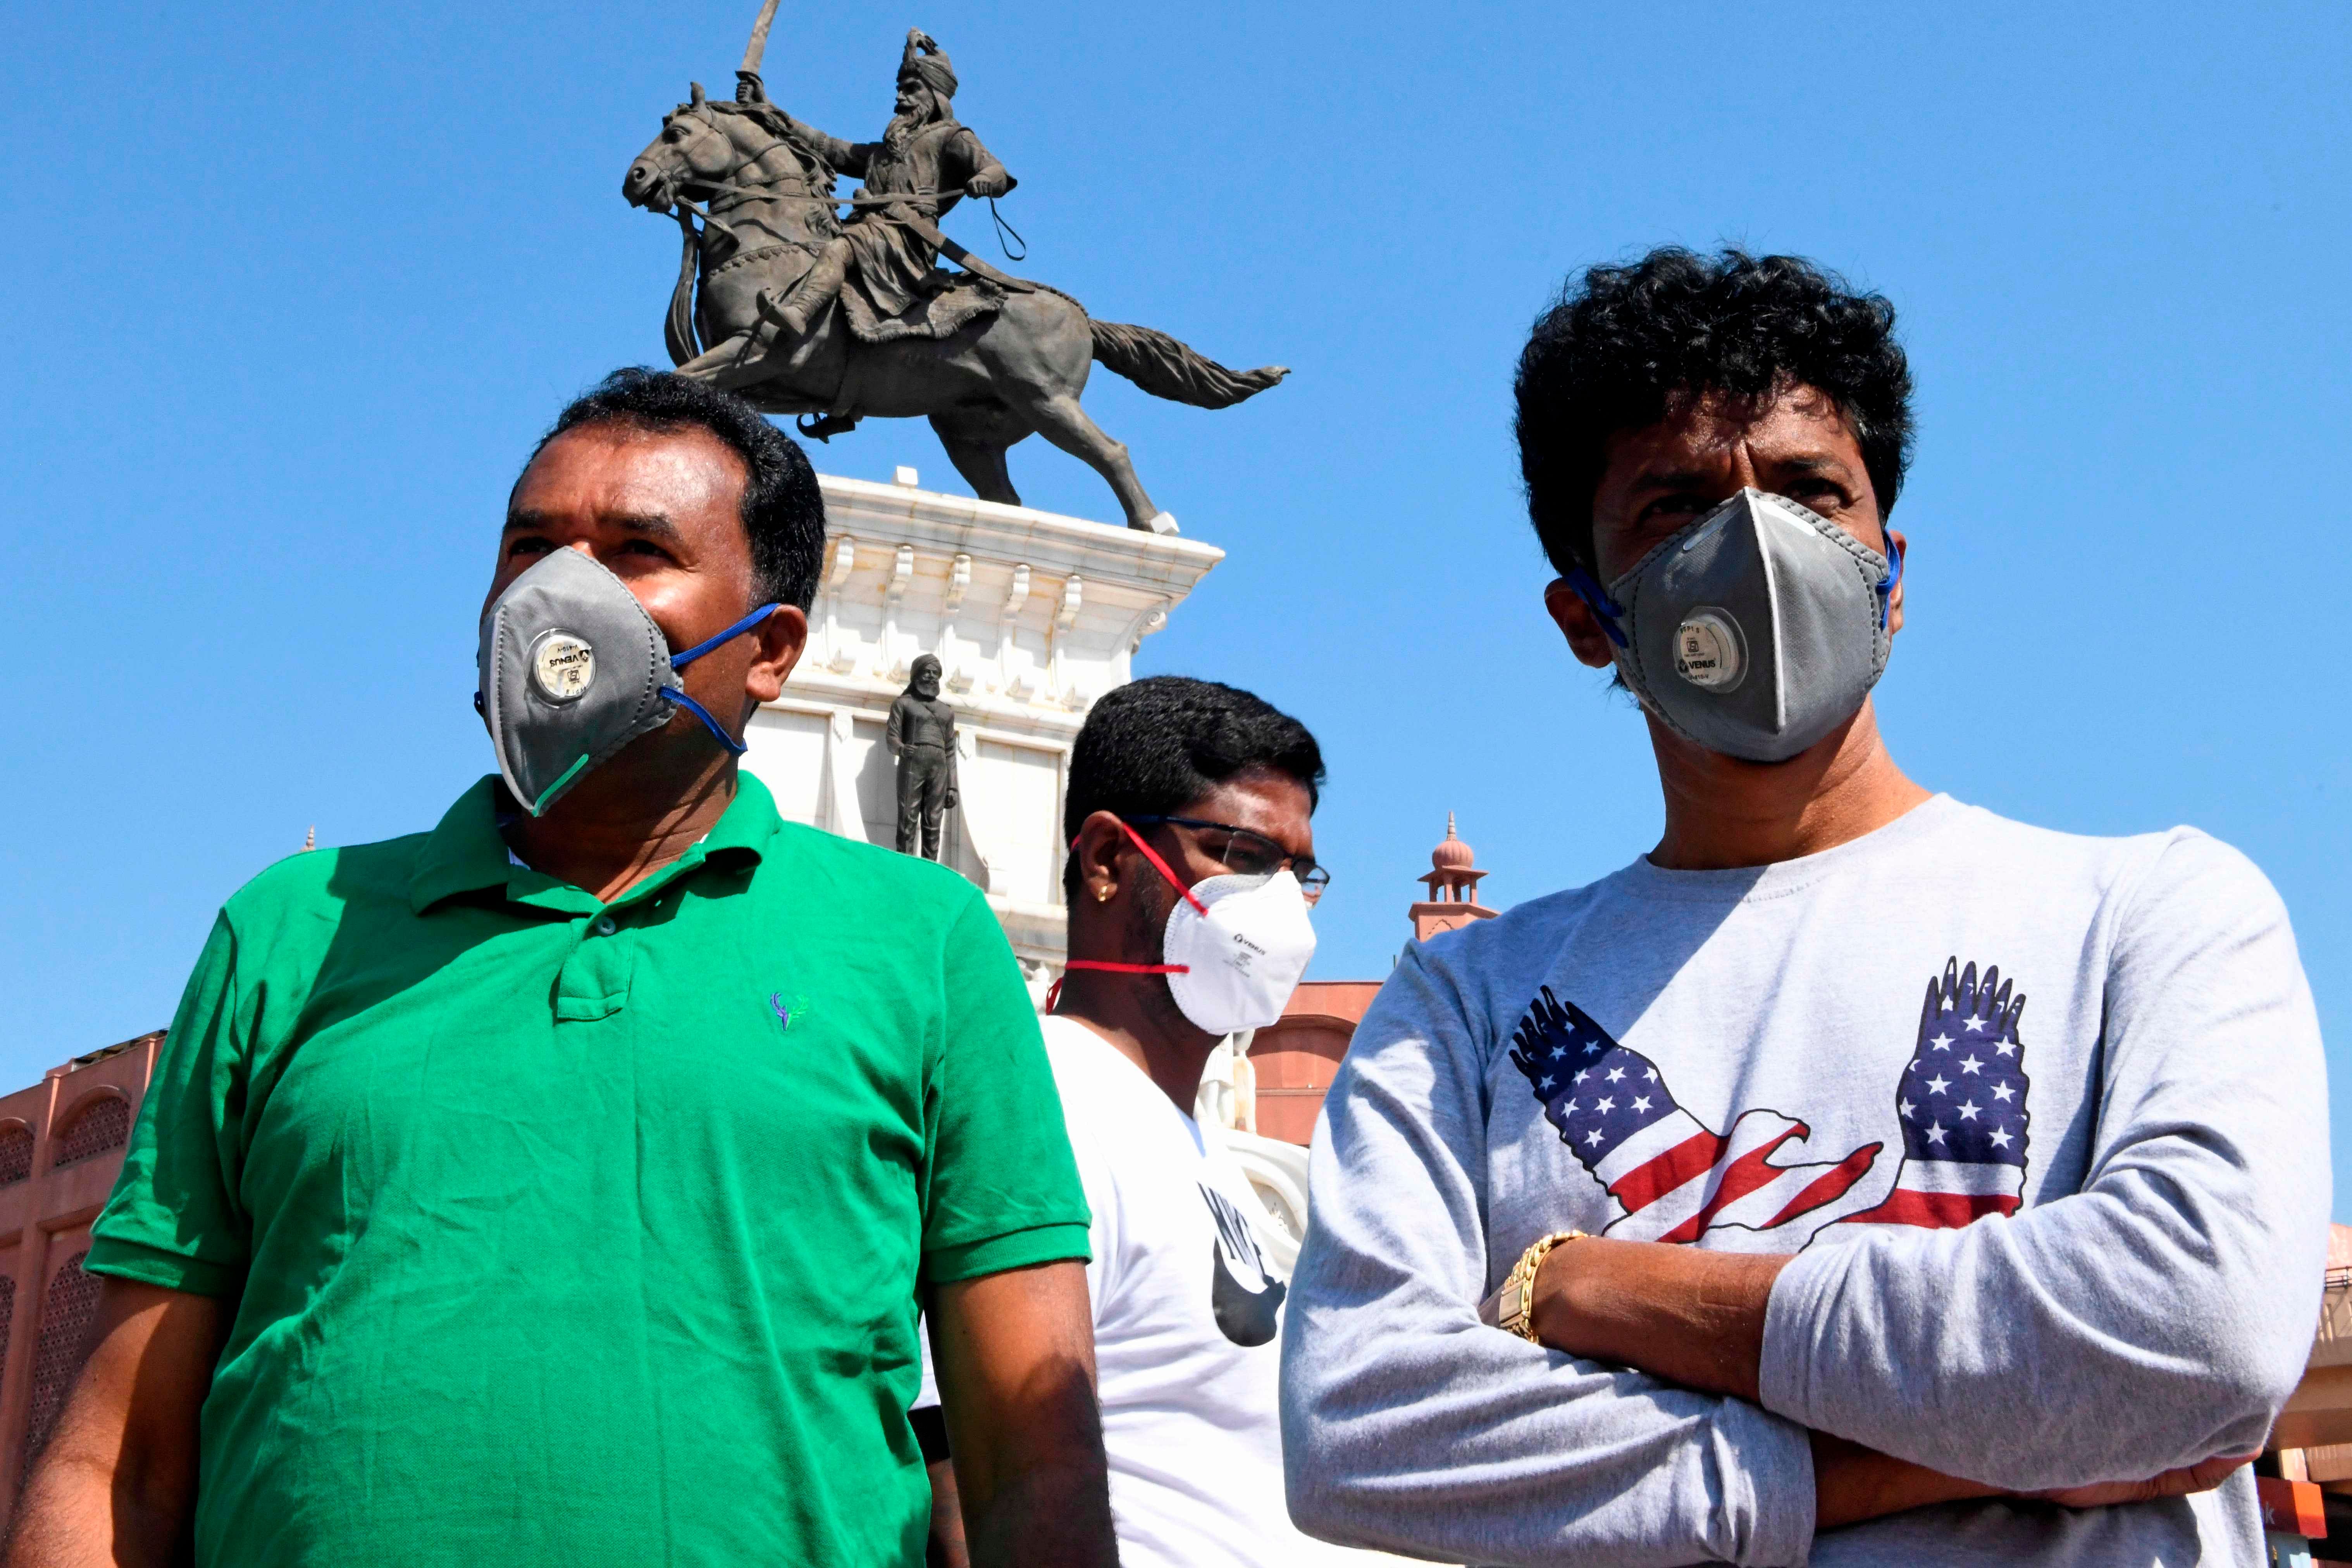 People wearing facemasks amid concerns over the spread of the COVID-19 novel coronavirus. (AFP Photo)